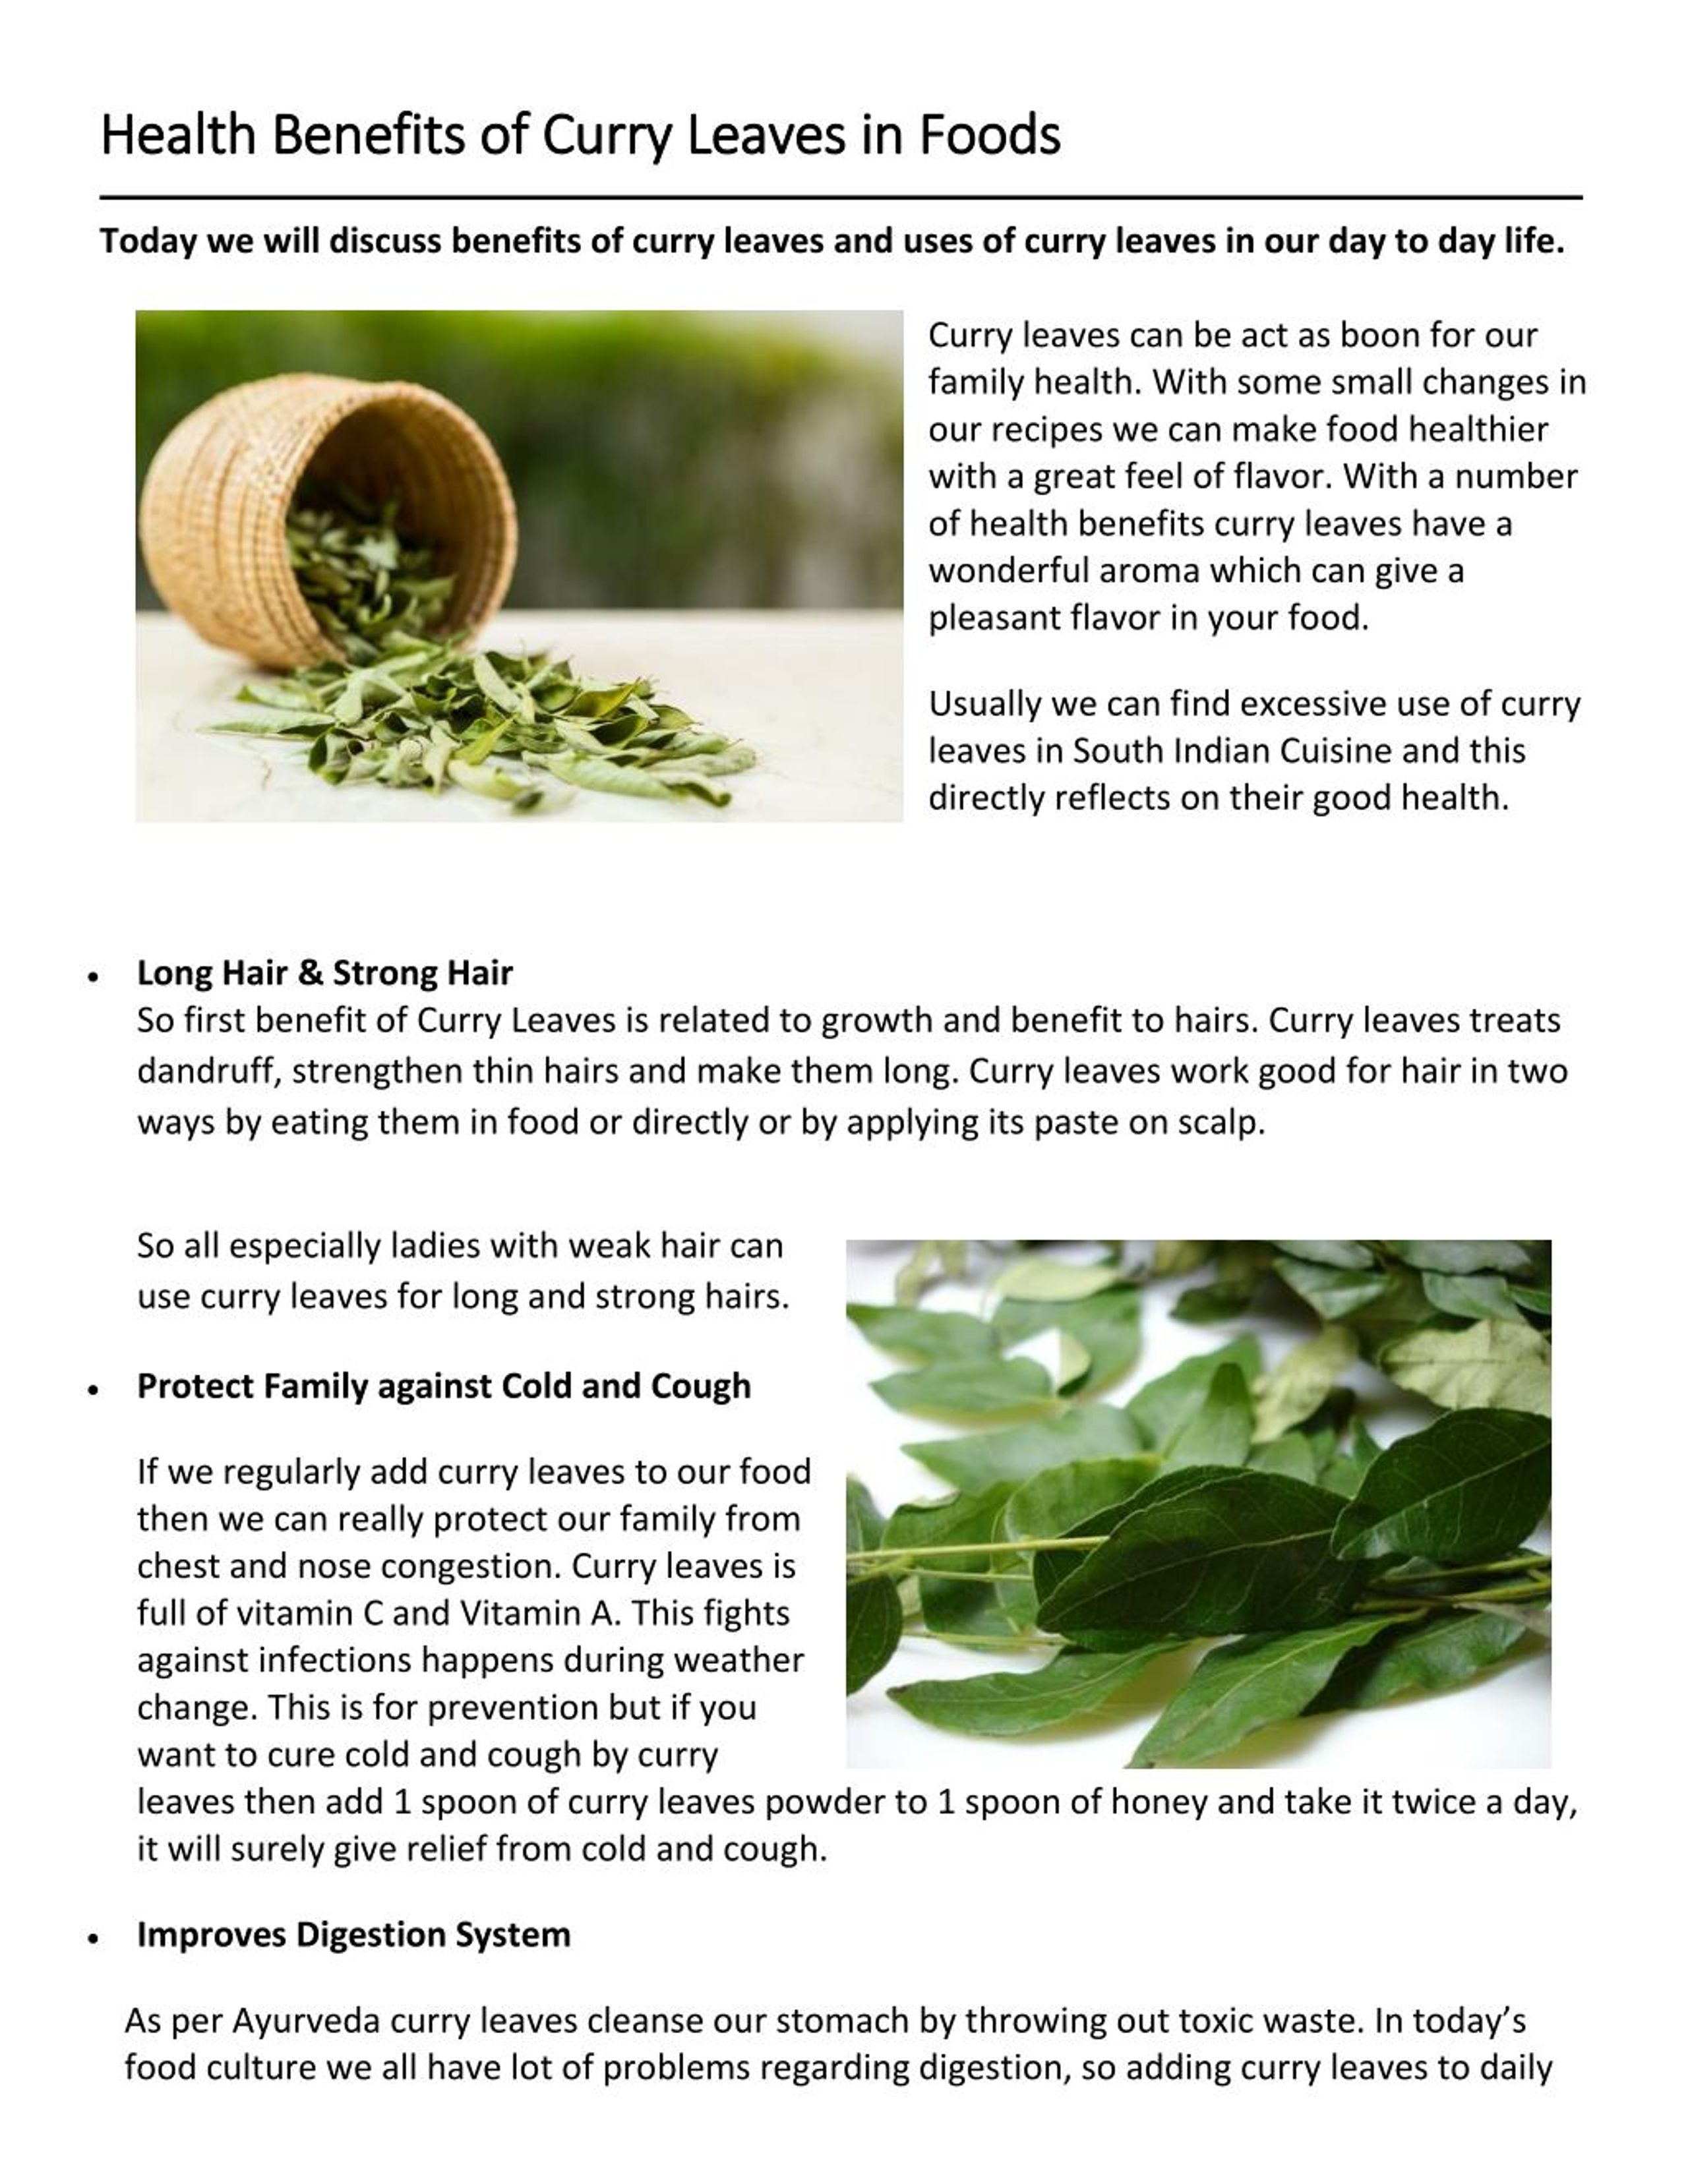 PPT - Health Benefits of Curry Leaves in Foods PowerPoint Presentation -  ID:7322982